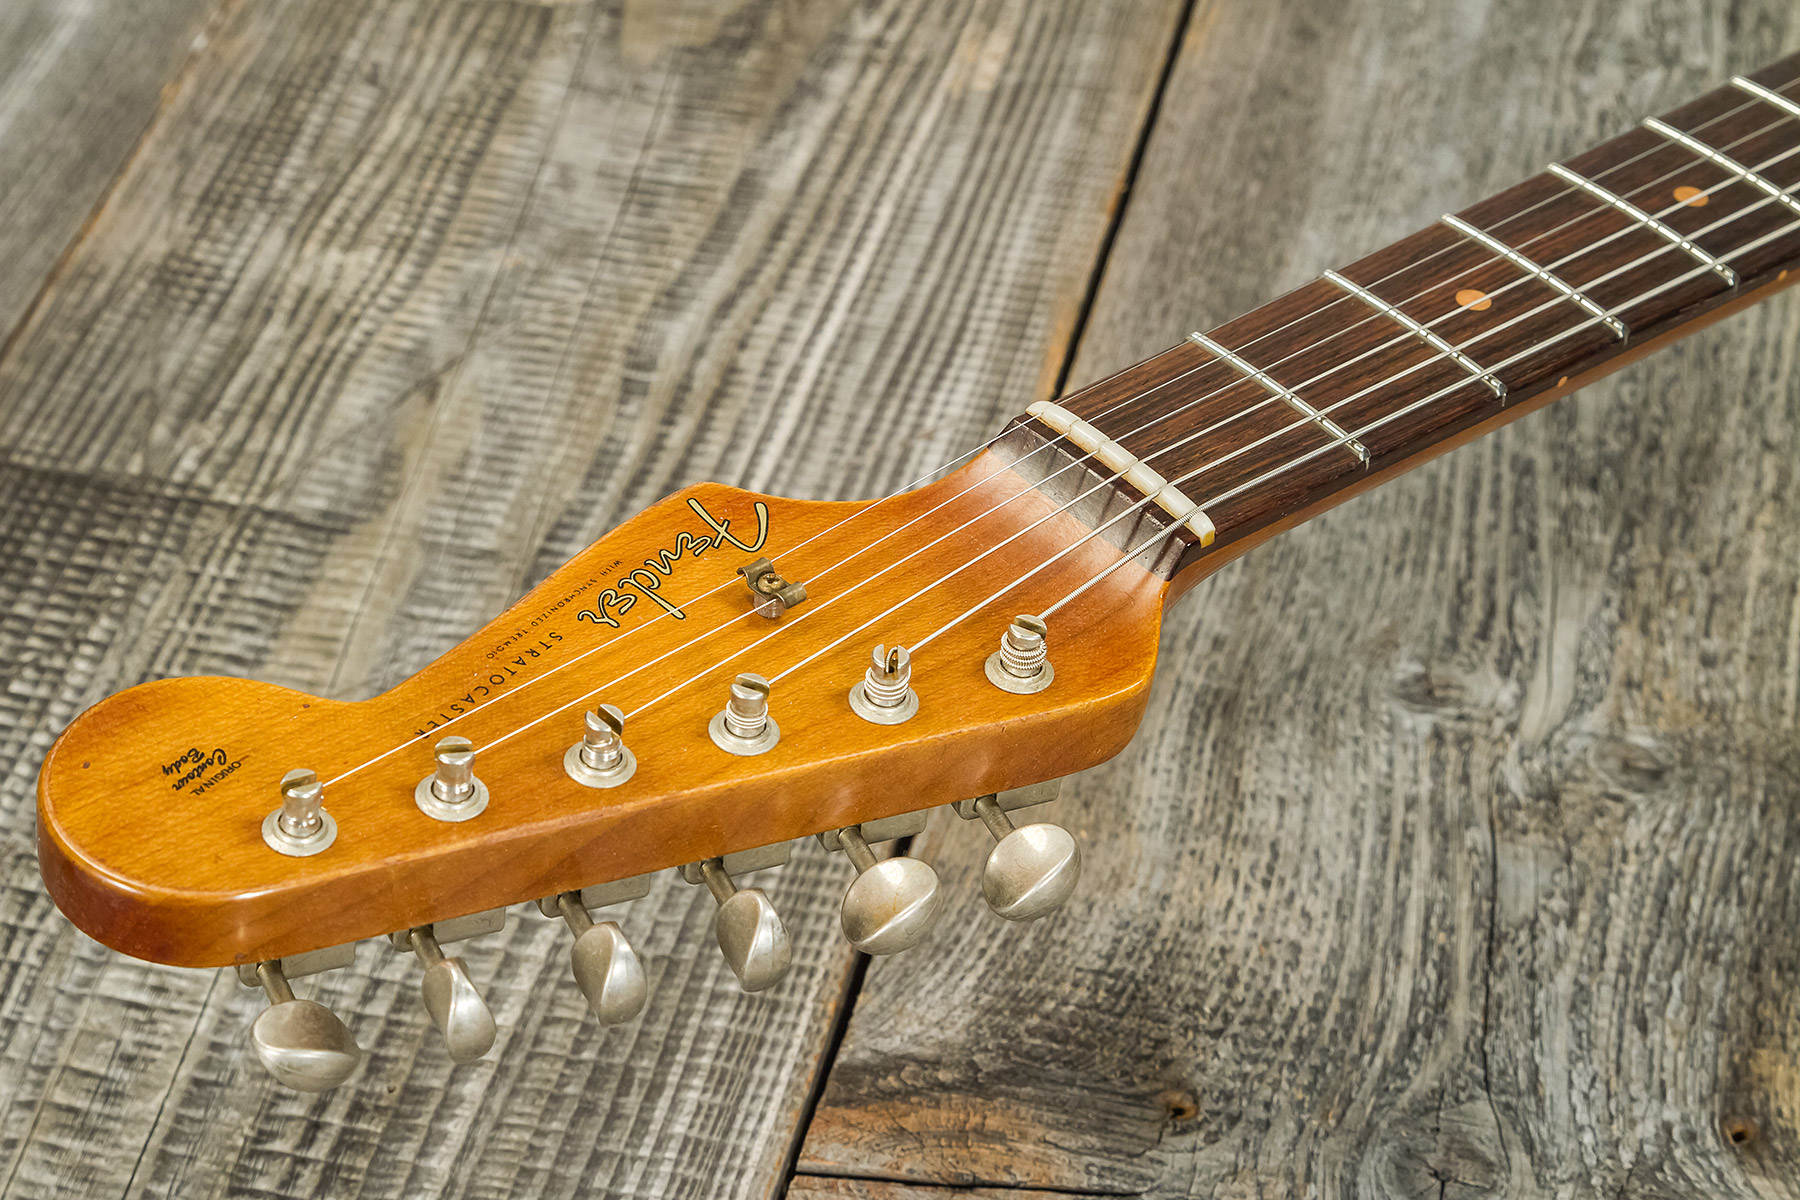 How to buy a vintage Fender Stratocaster